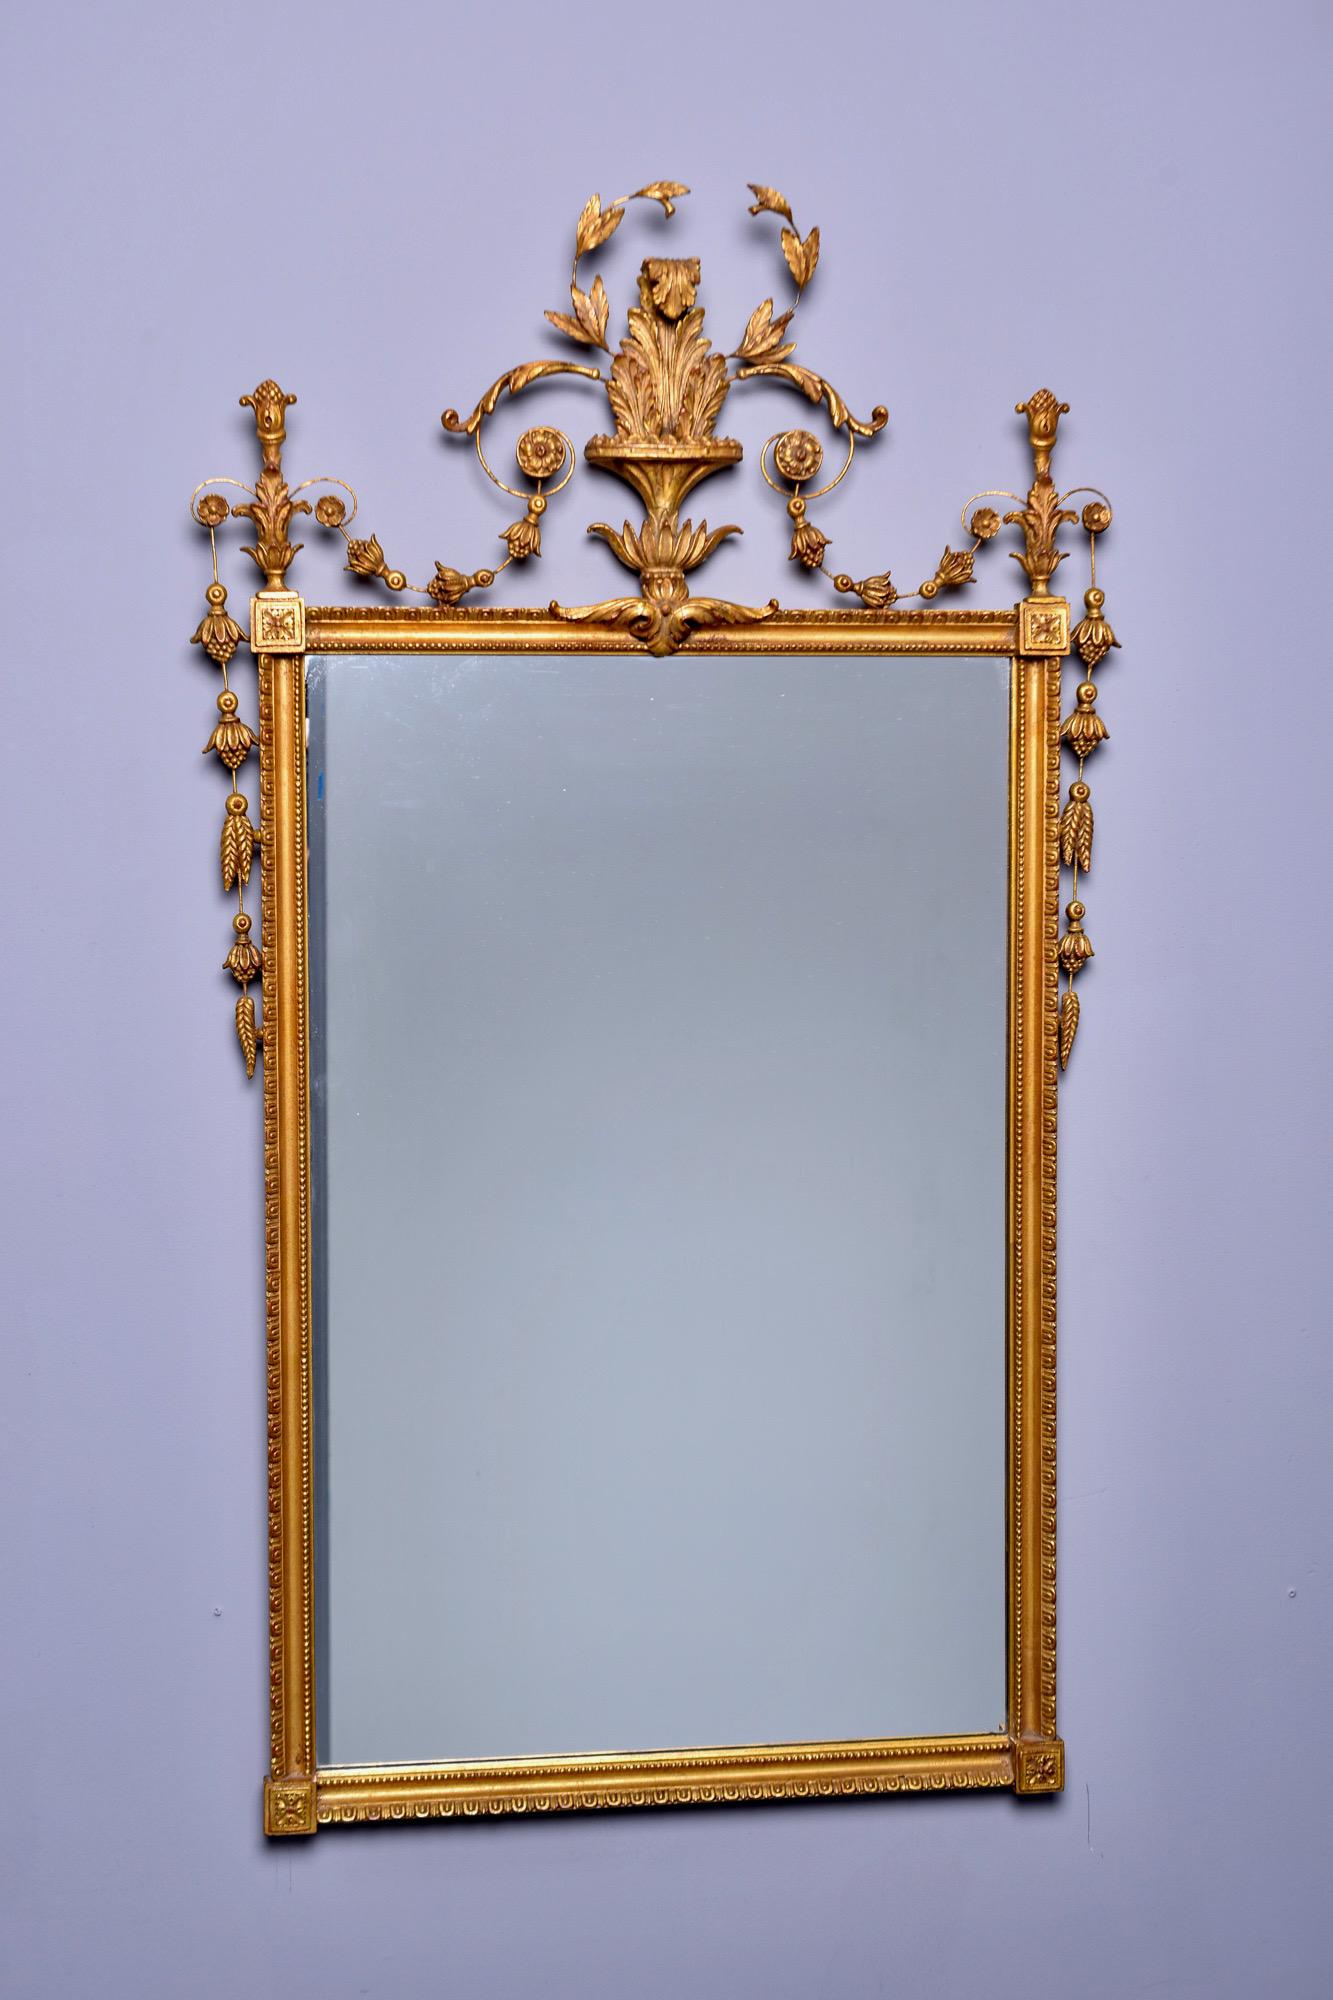 Fancy giltwood mirror with rectangular frame and fancy crest with floral and foliate detail. Labeled on back D. Milch and Sons, circa 1950s. 

Actual mirror size: 33.25” H x 21.25” W.